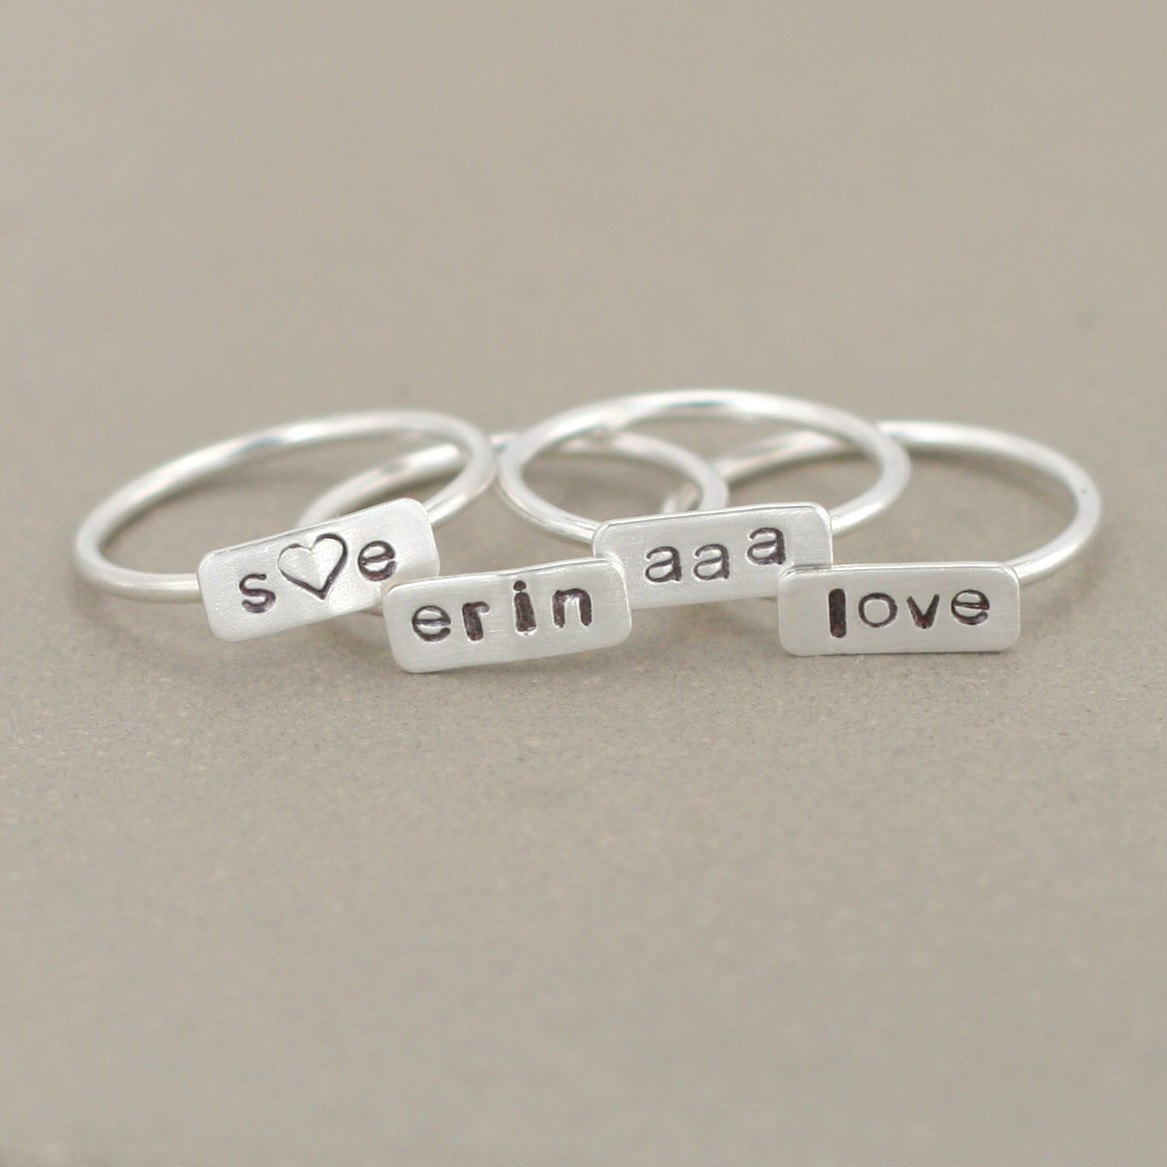 Custom, hand stamped silver rings - would make great bridesmaid gifts!